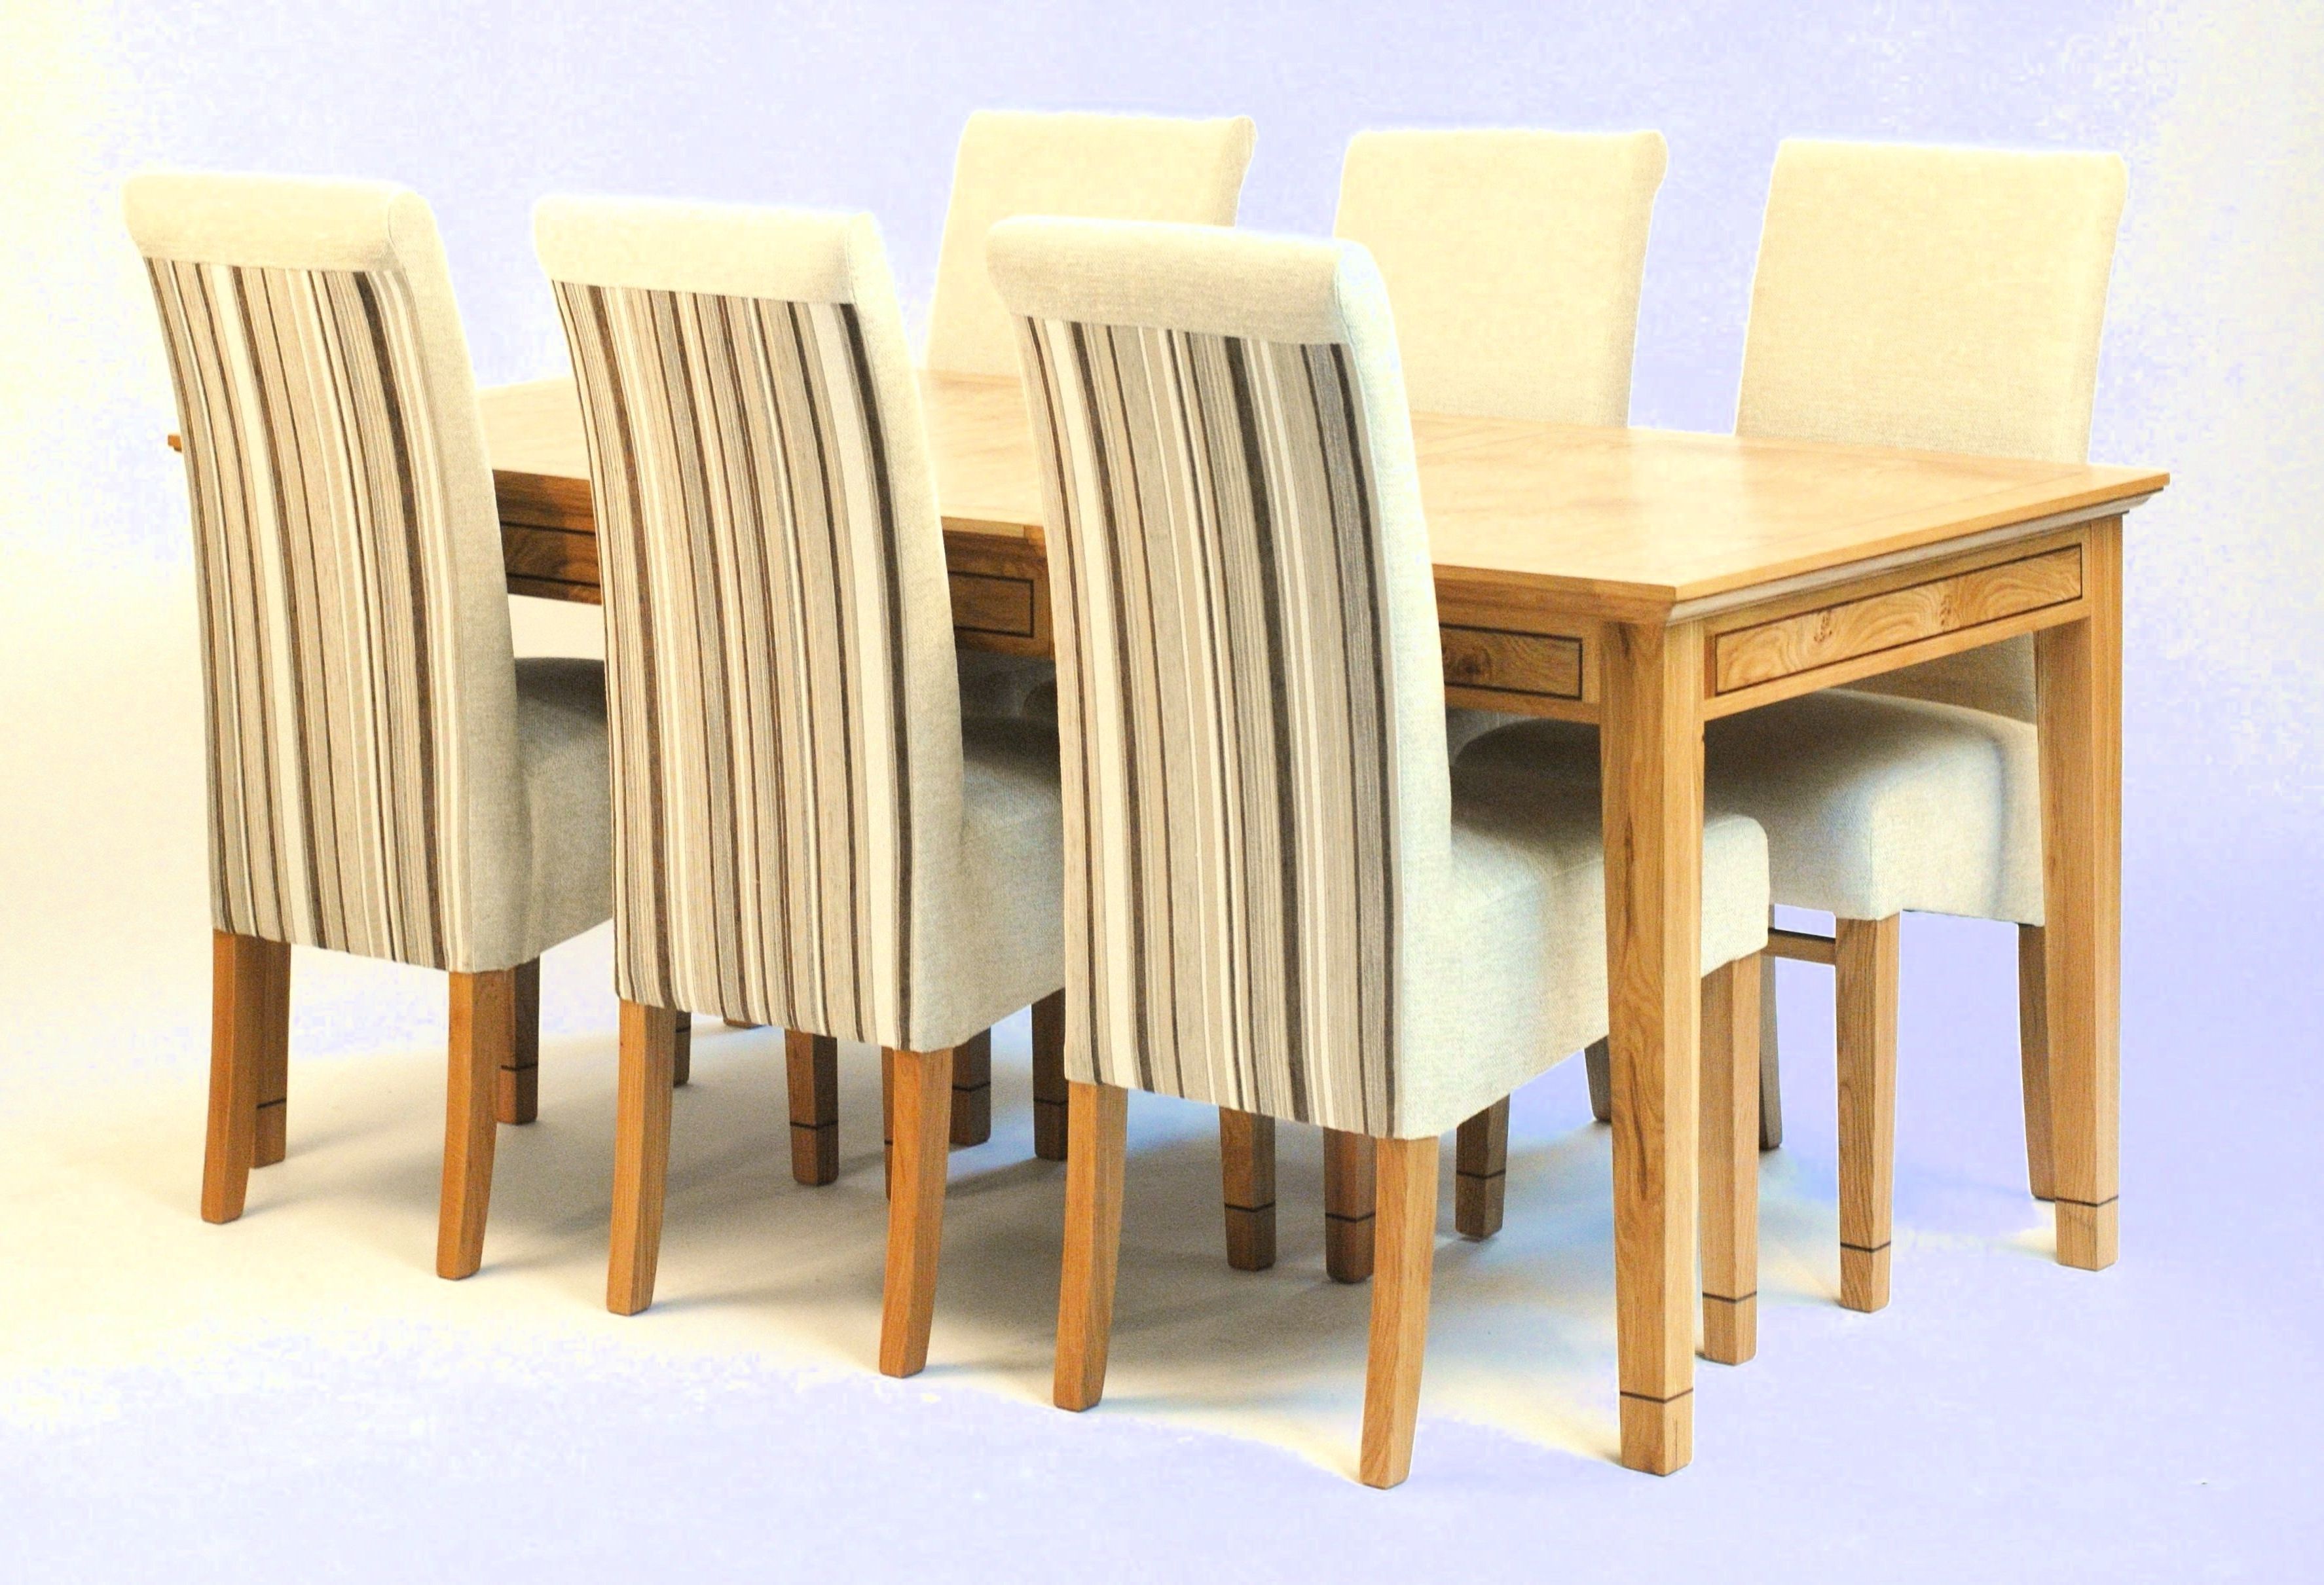 Walnut Dining Tables And 6 Chairs Intended For Favorite Oak Extending Dining Table & 6 Chairs (View 20 of 25)